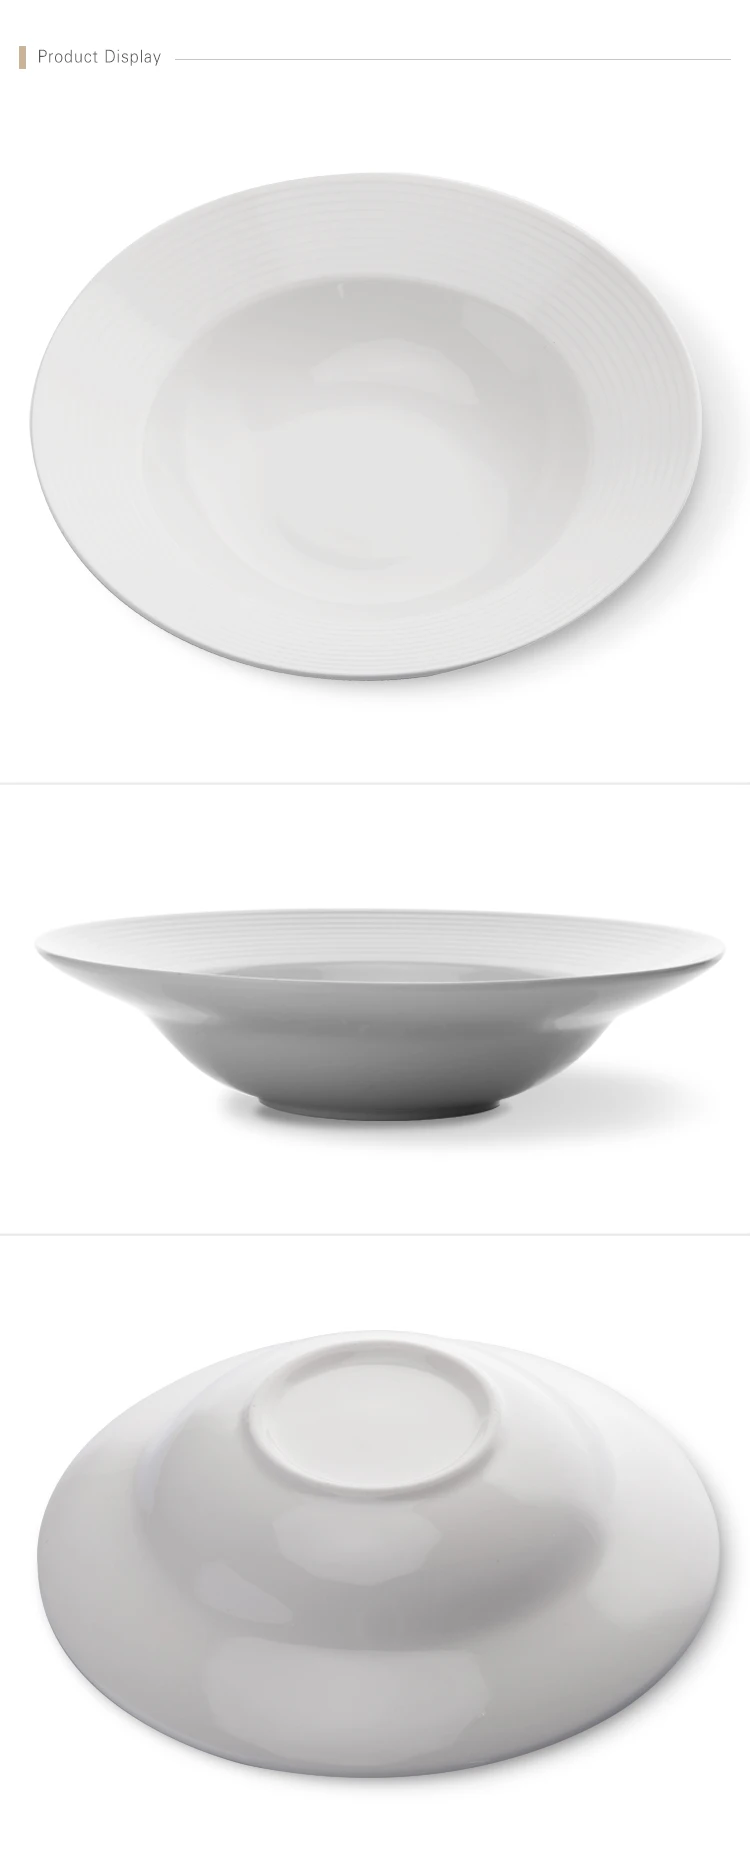 Luxury Oven Safe Catering Dinner White Ware Set Plate, Moden Style Heat Resistant Bar Ceramic Dining Plate Pasta Plate#